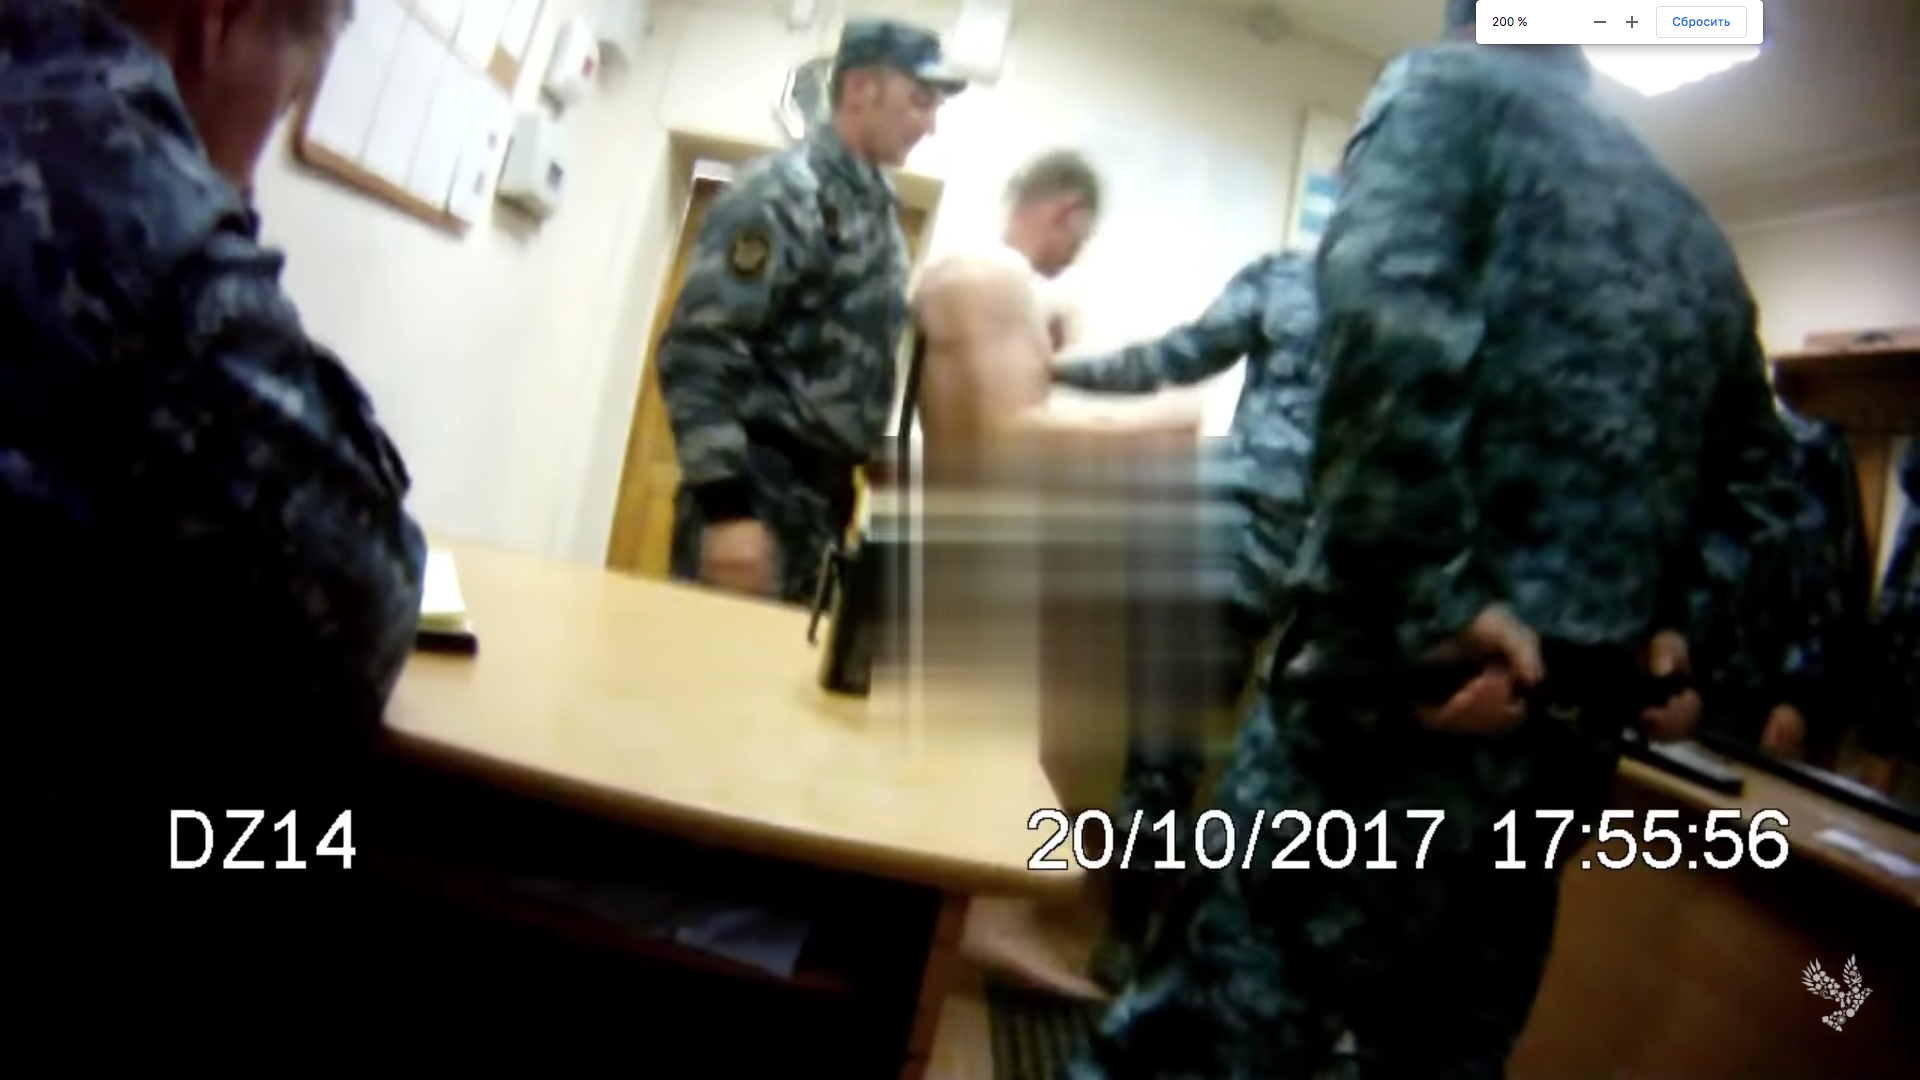 "Savelyev's List": Gulagu.net reveals the names and photos of people involved in torture in Regional Tuberculosis Hospital-1